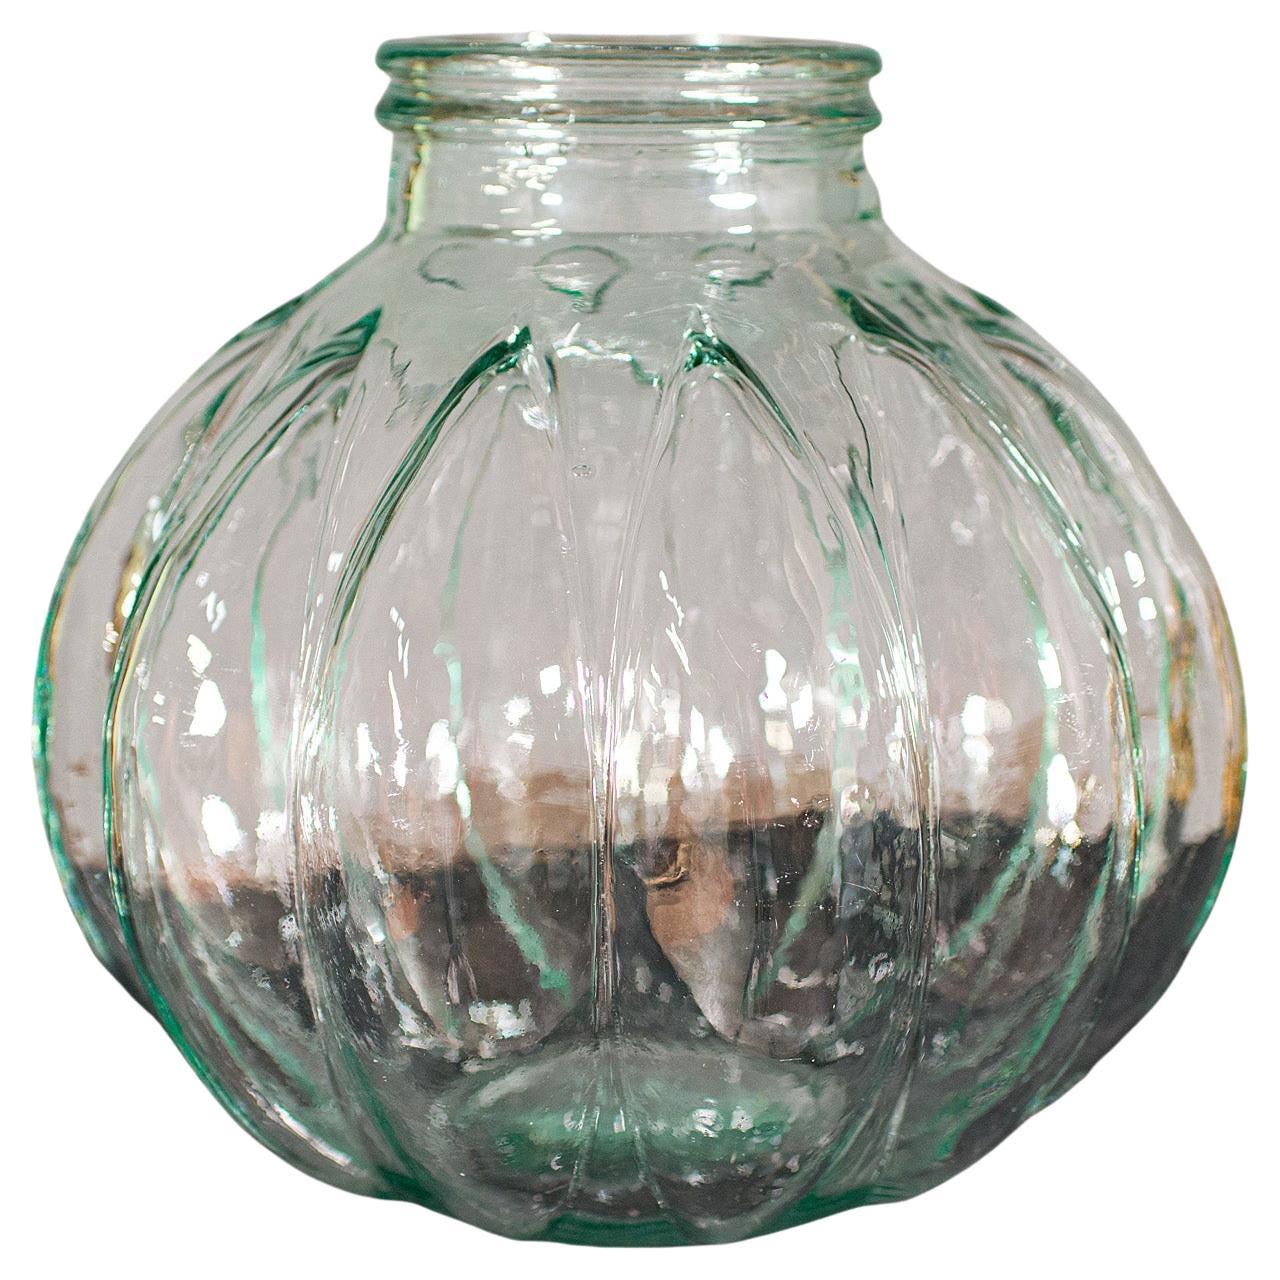 What is a glass carboy used for?